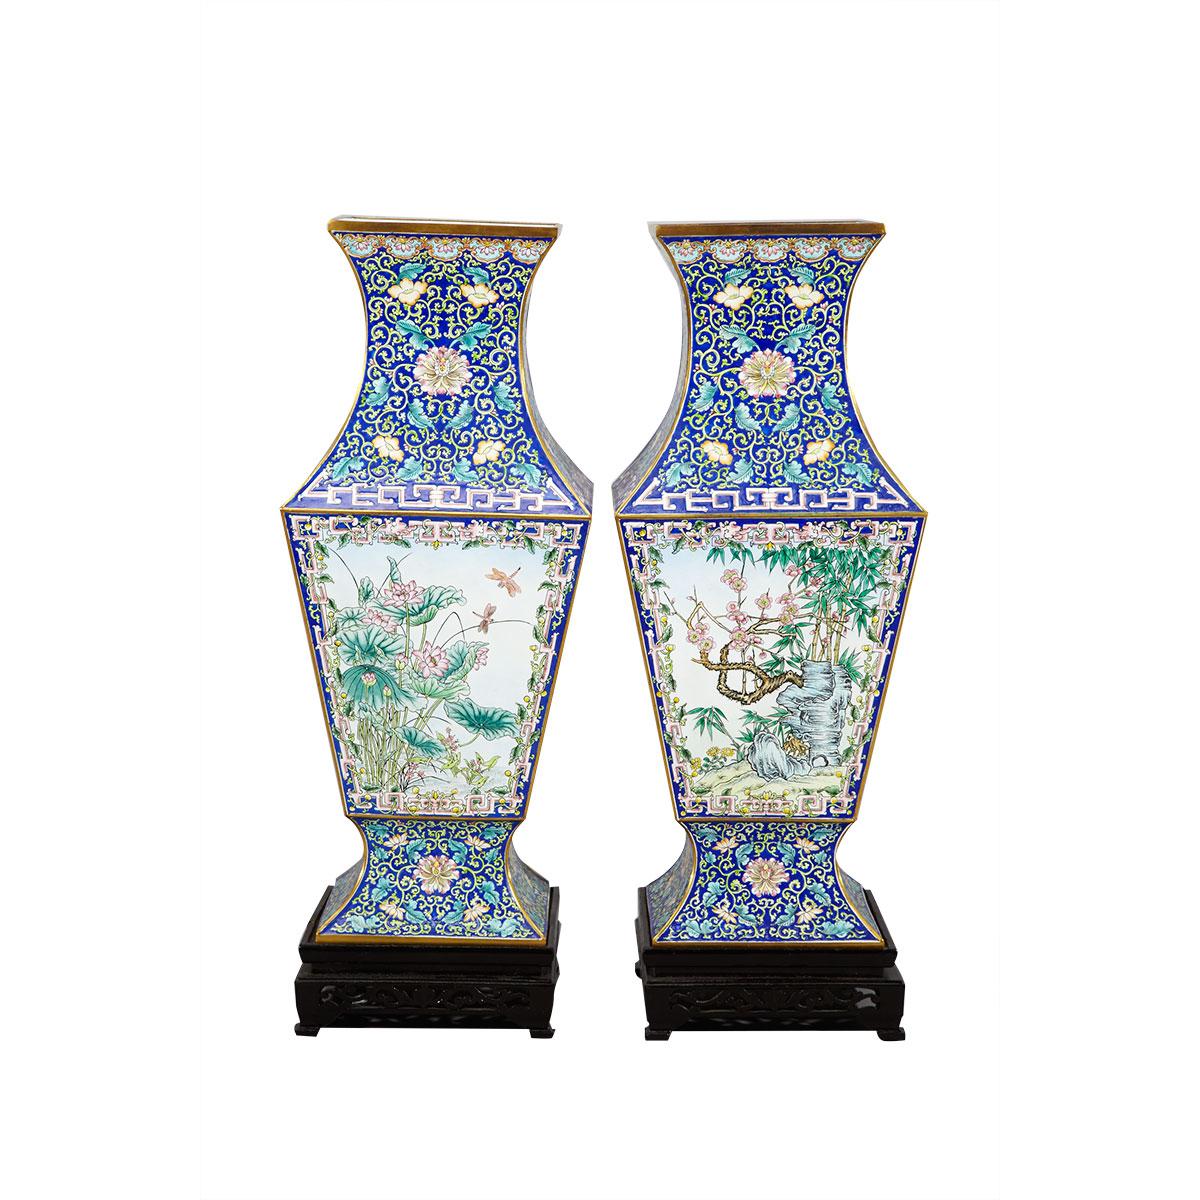 Pair of Large Canton Enamel Faceted Vases